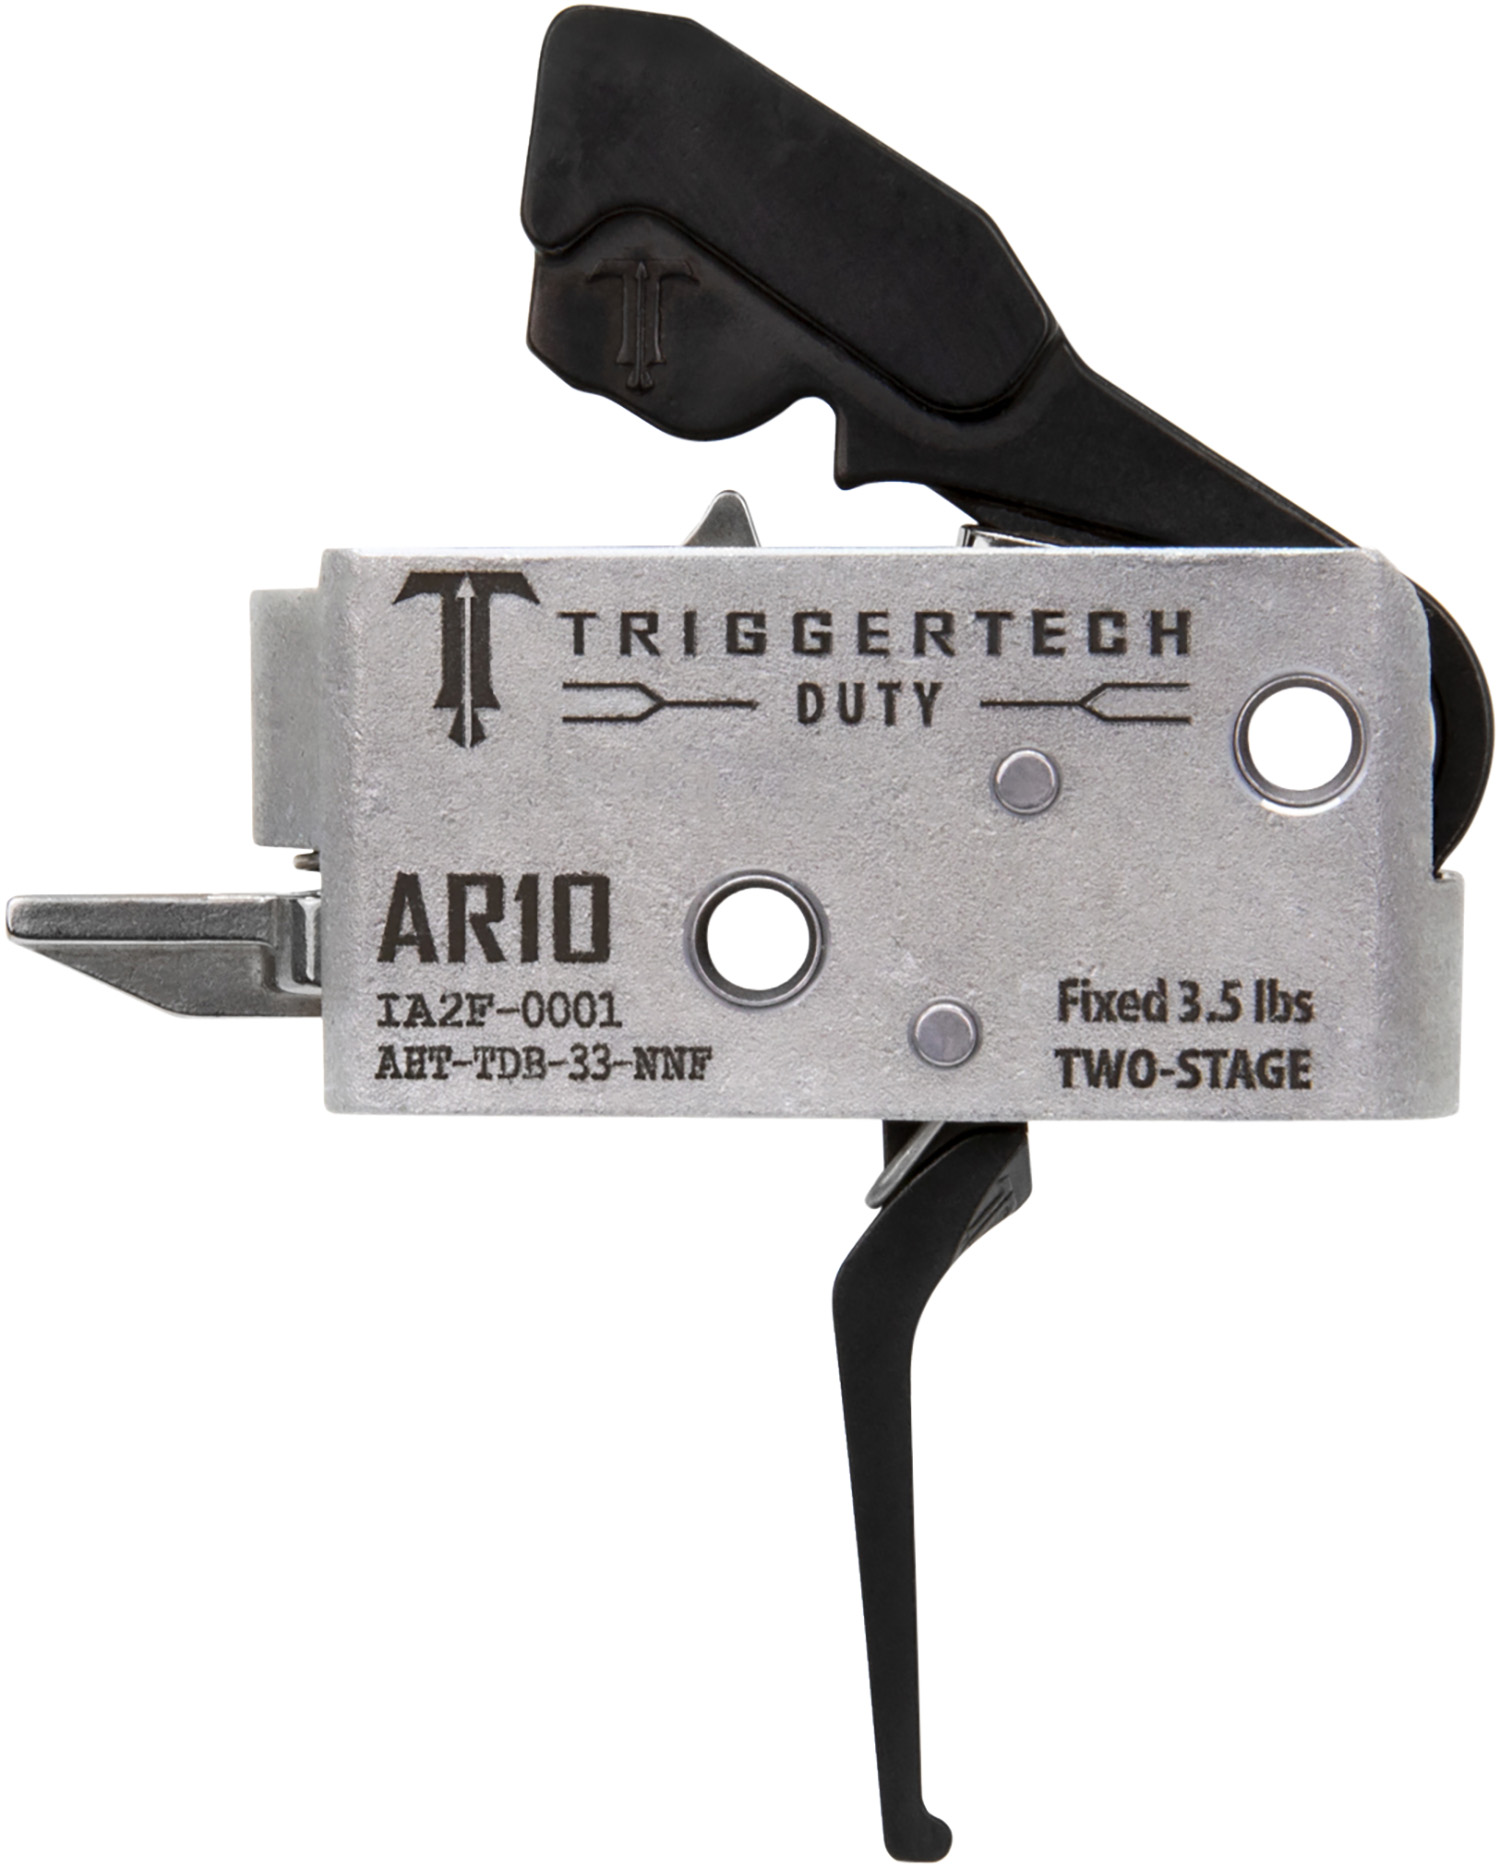 TriggerTech AHTTDB33NNF Duty Flat Two-Stage 3.50 Lbs Draw Weight Fits AR-10